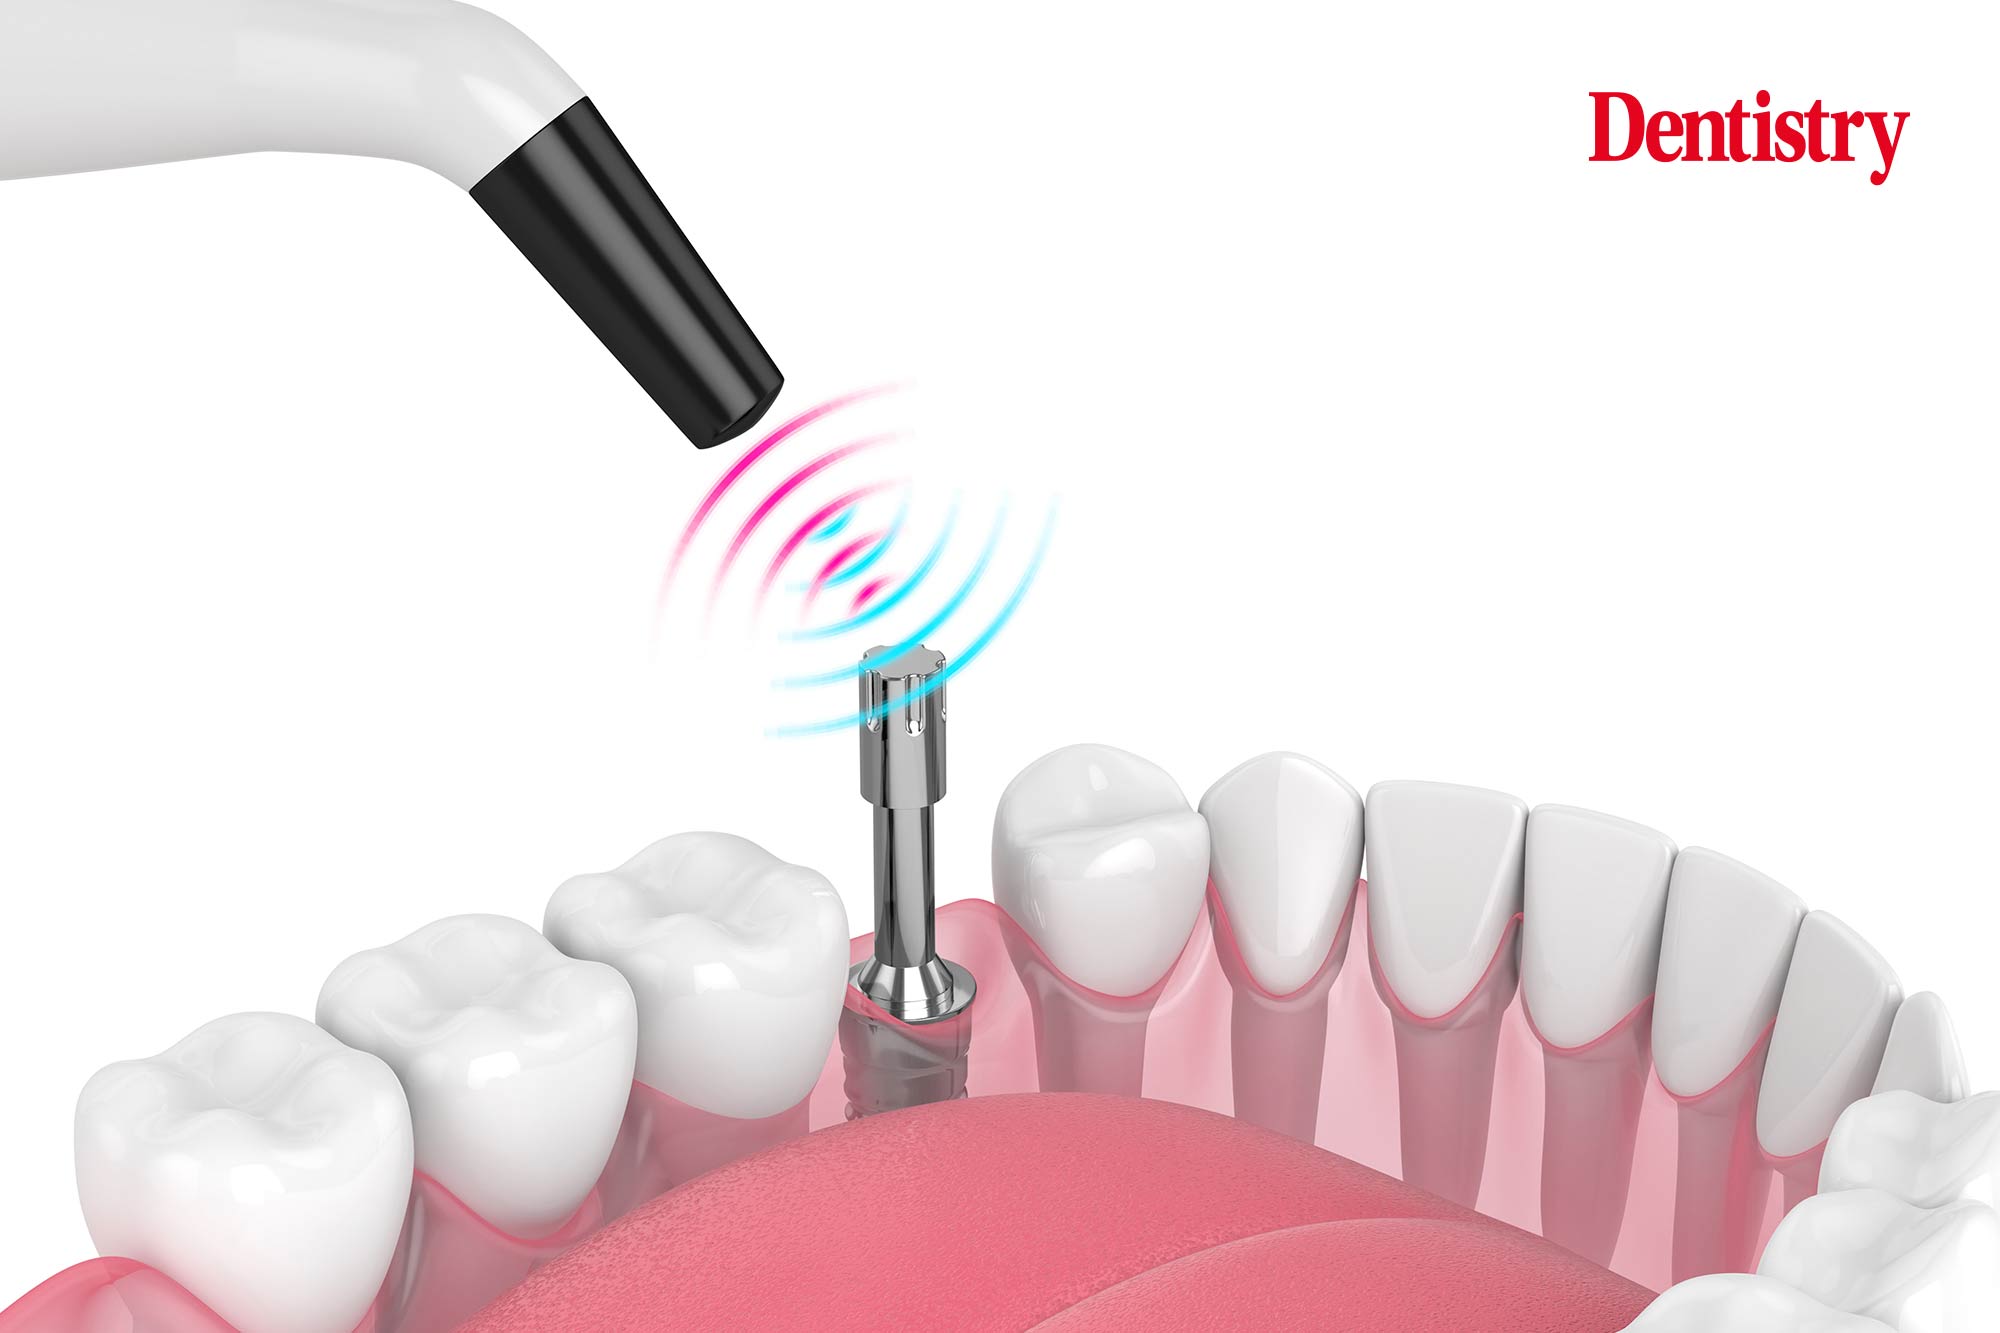 In this month's Implant Insights column, Morven McCauley assesses the use of ISQ devices, including their accuracy, cost and benefits.